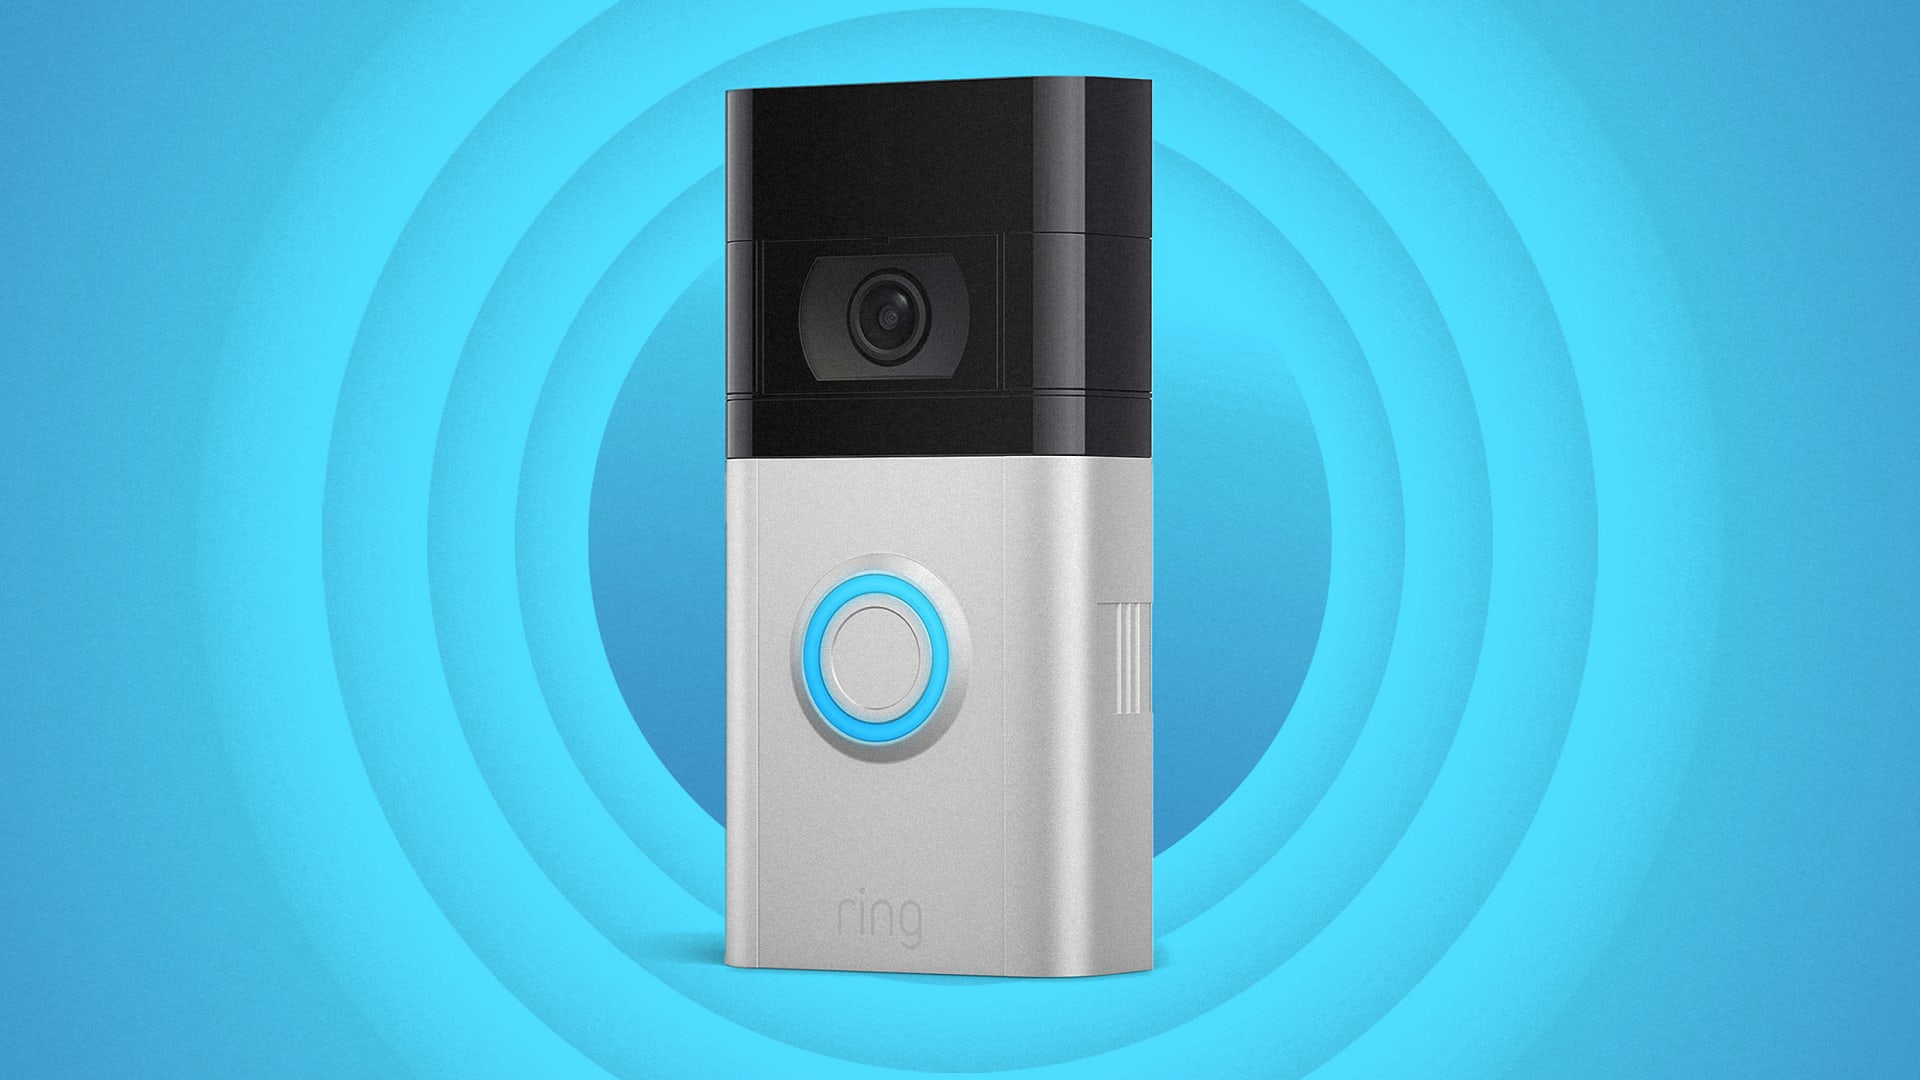 The Ring’s doorbell design hasn’t changed since 2014. Other companies should follow its lead